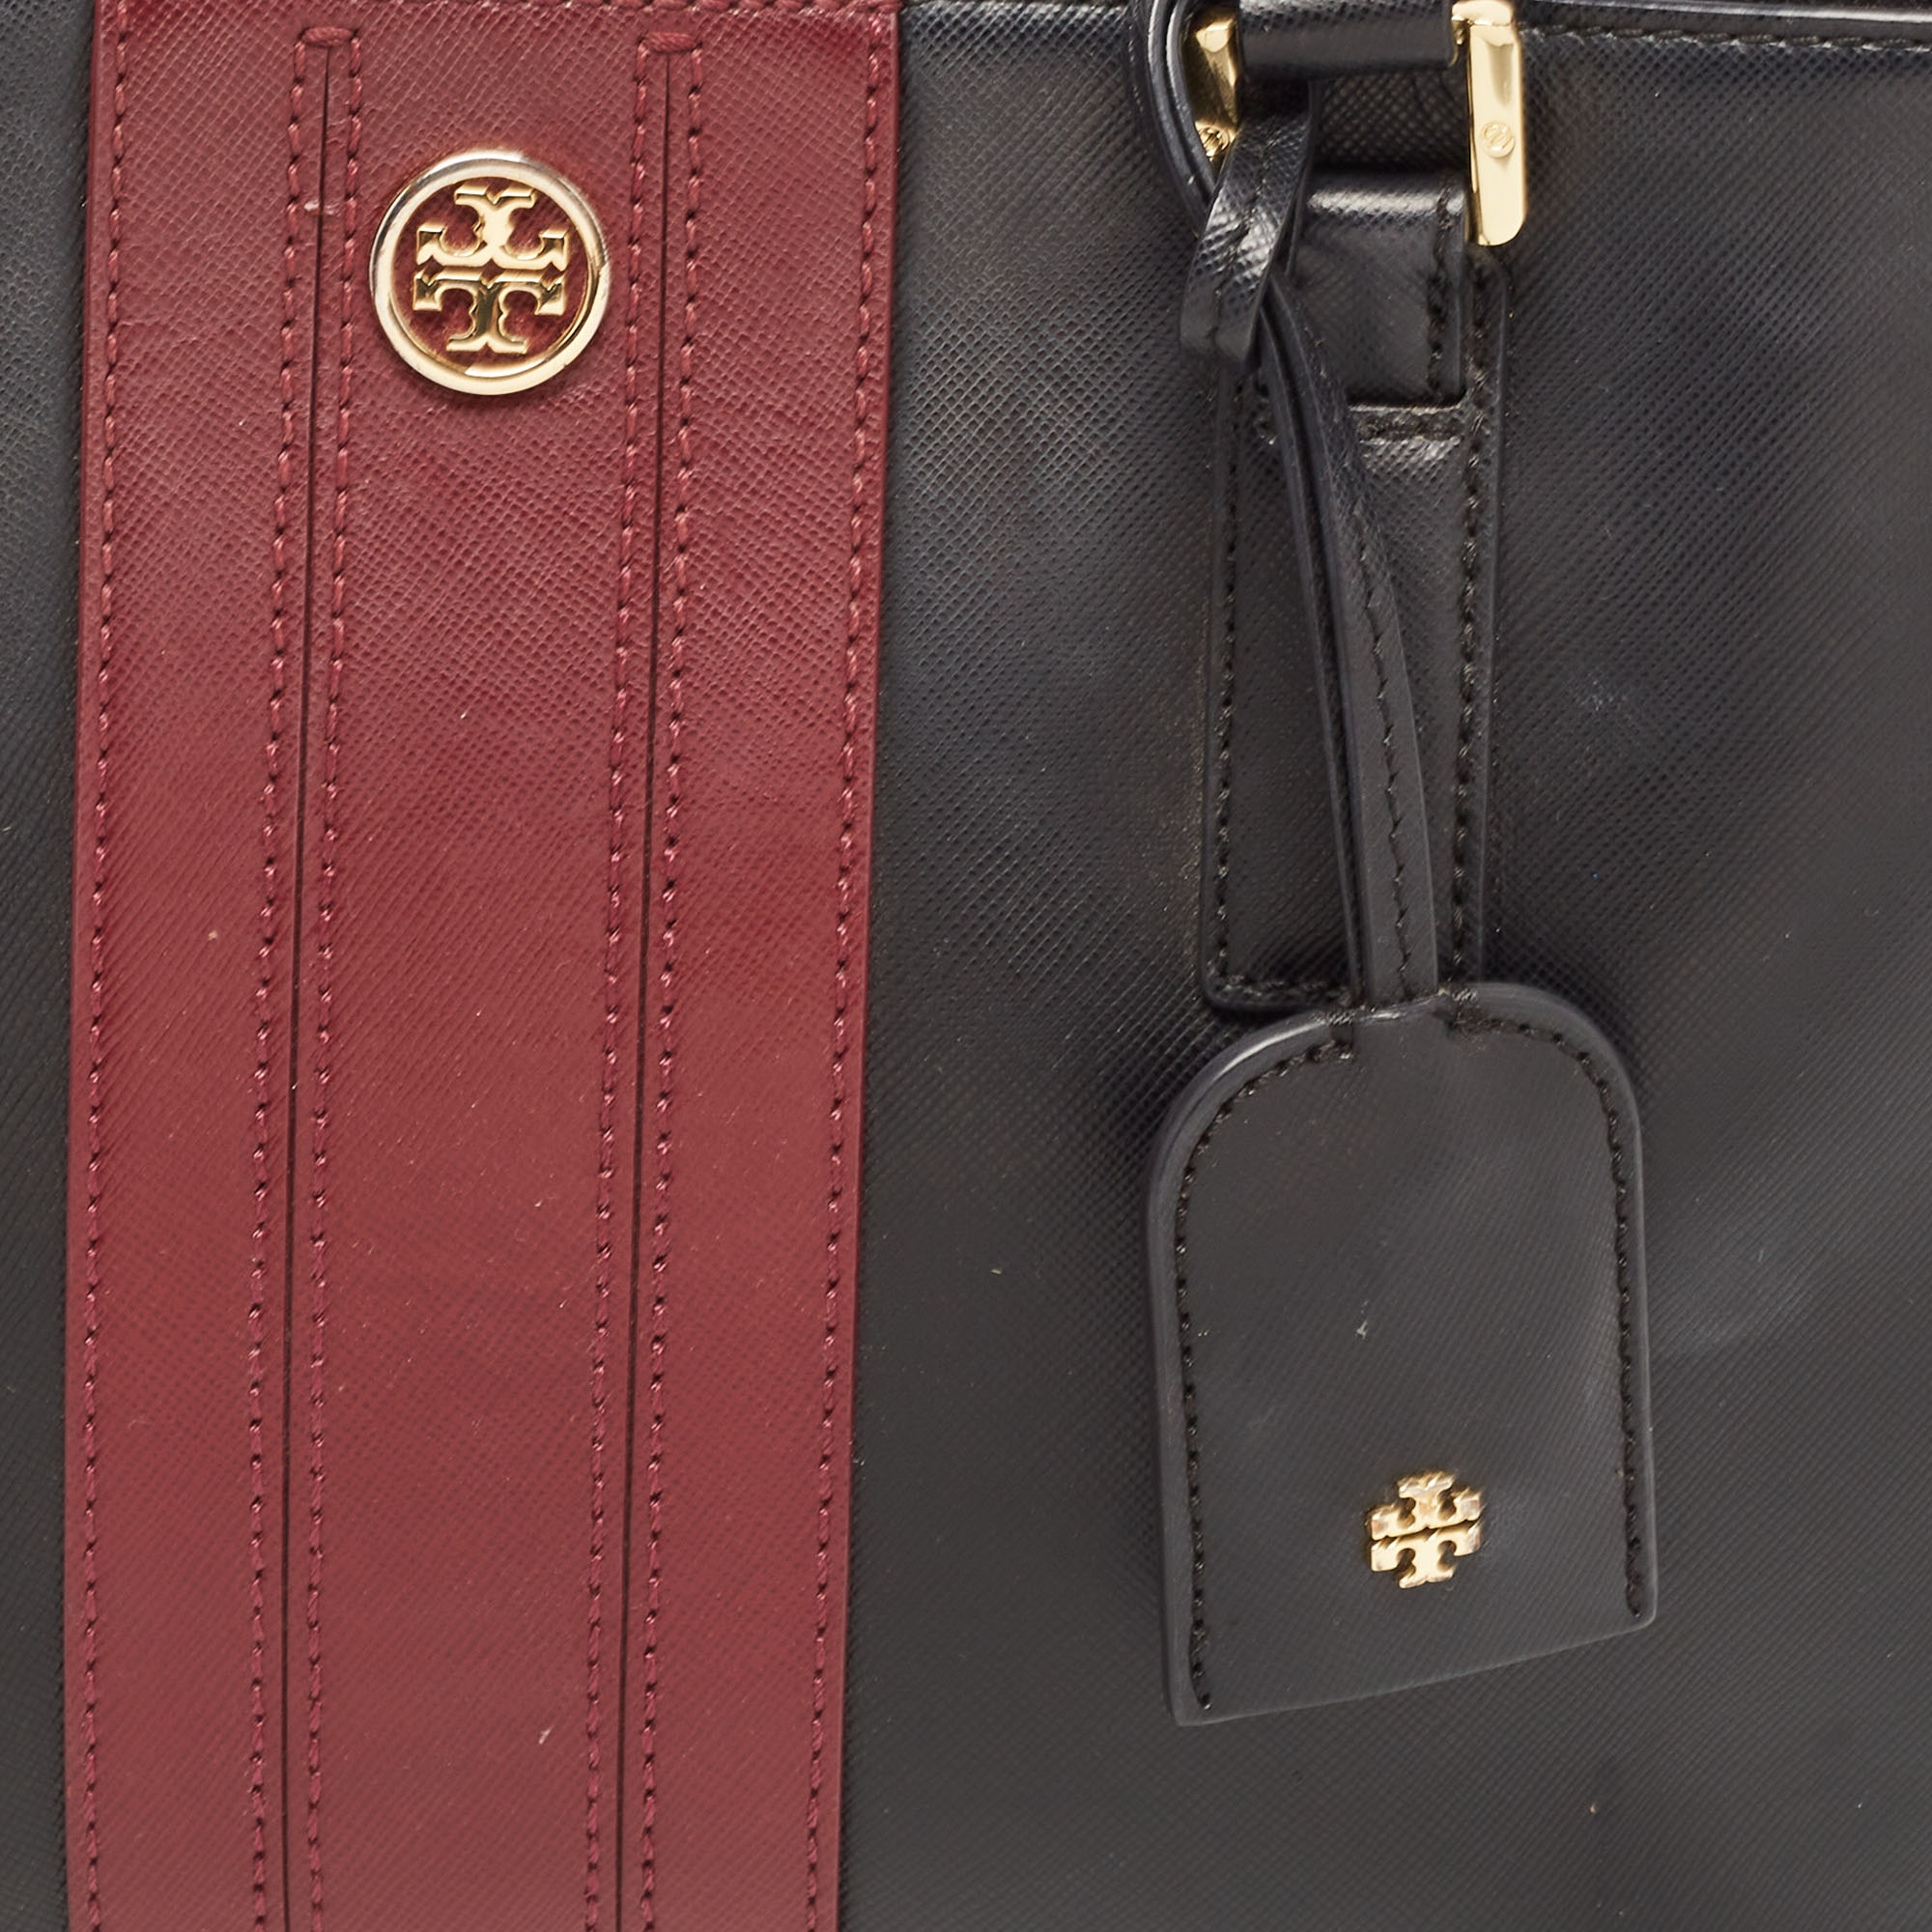 Tory Burch Black/Burgundy Saffiano Leather Robinson Double Zip Tote